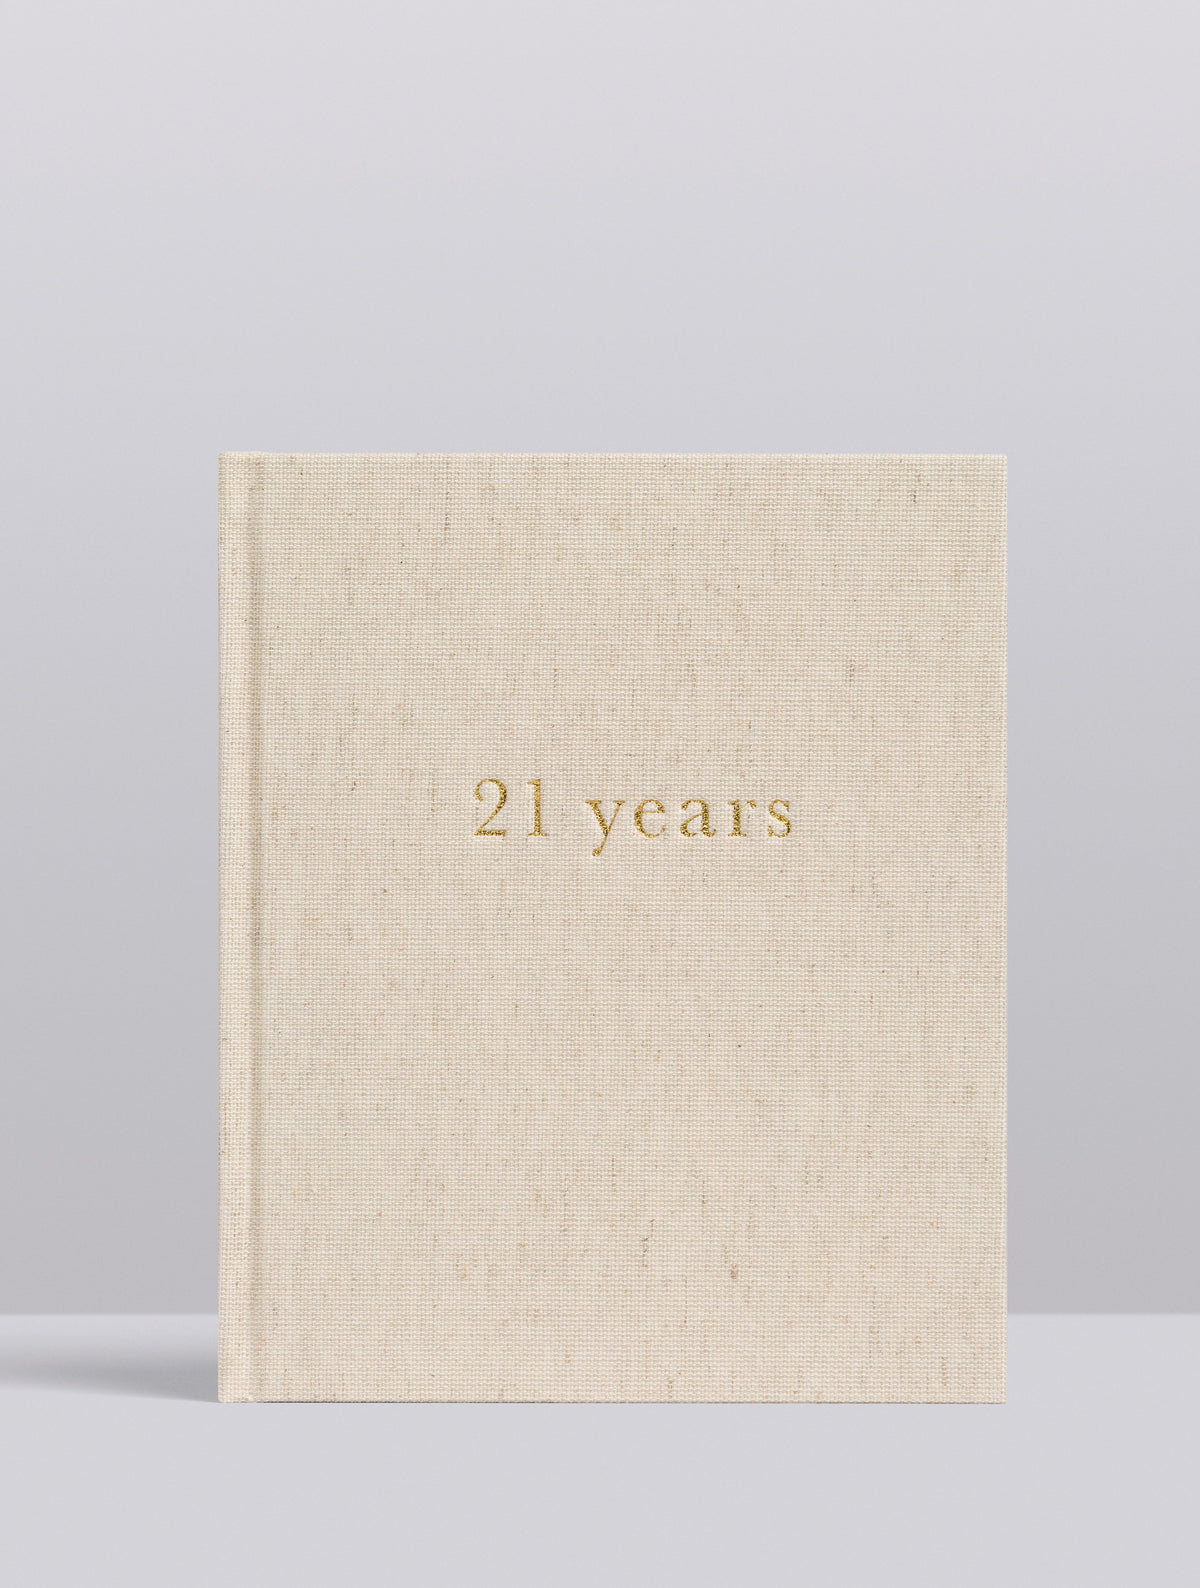 21 Years. 21 Years Of You. Oatmeal. Preorder